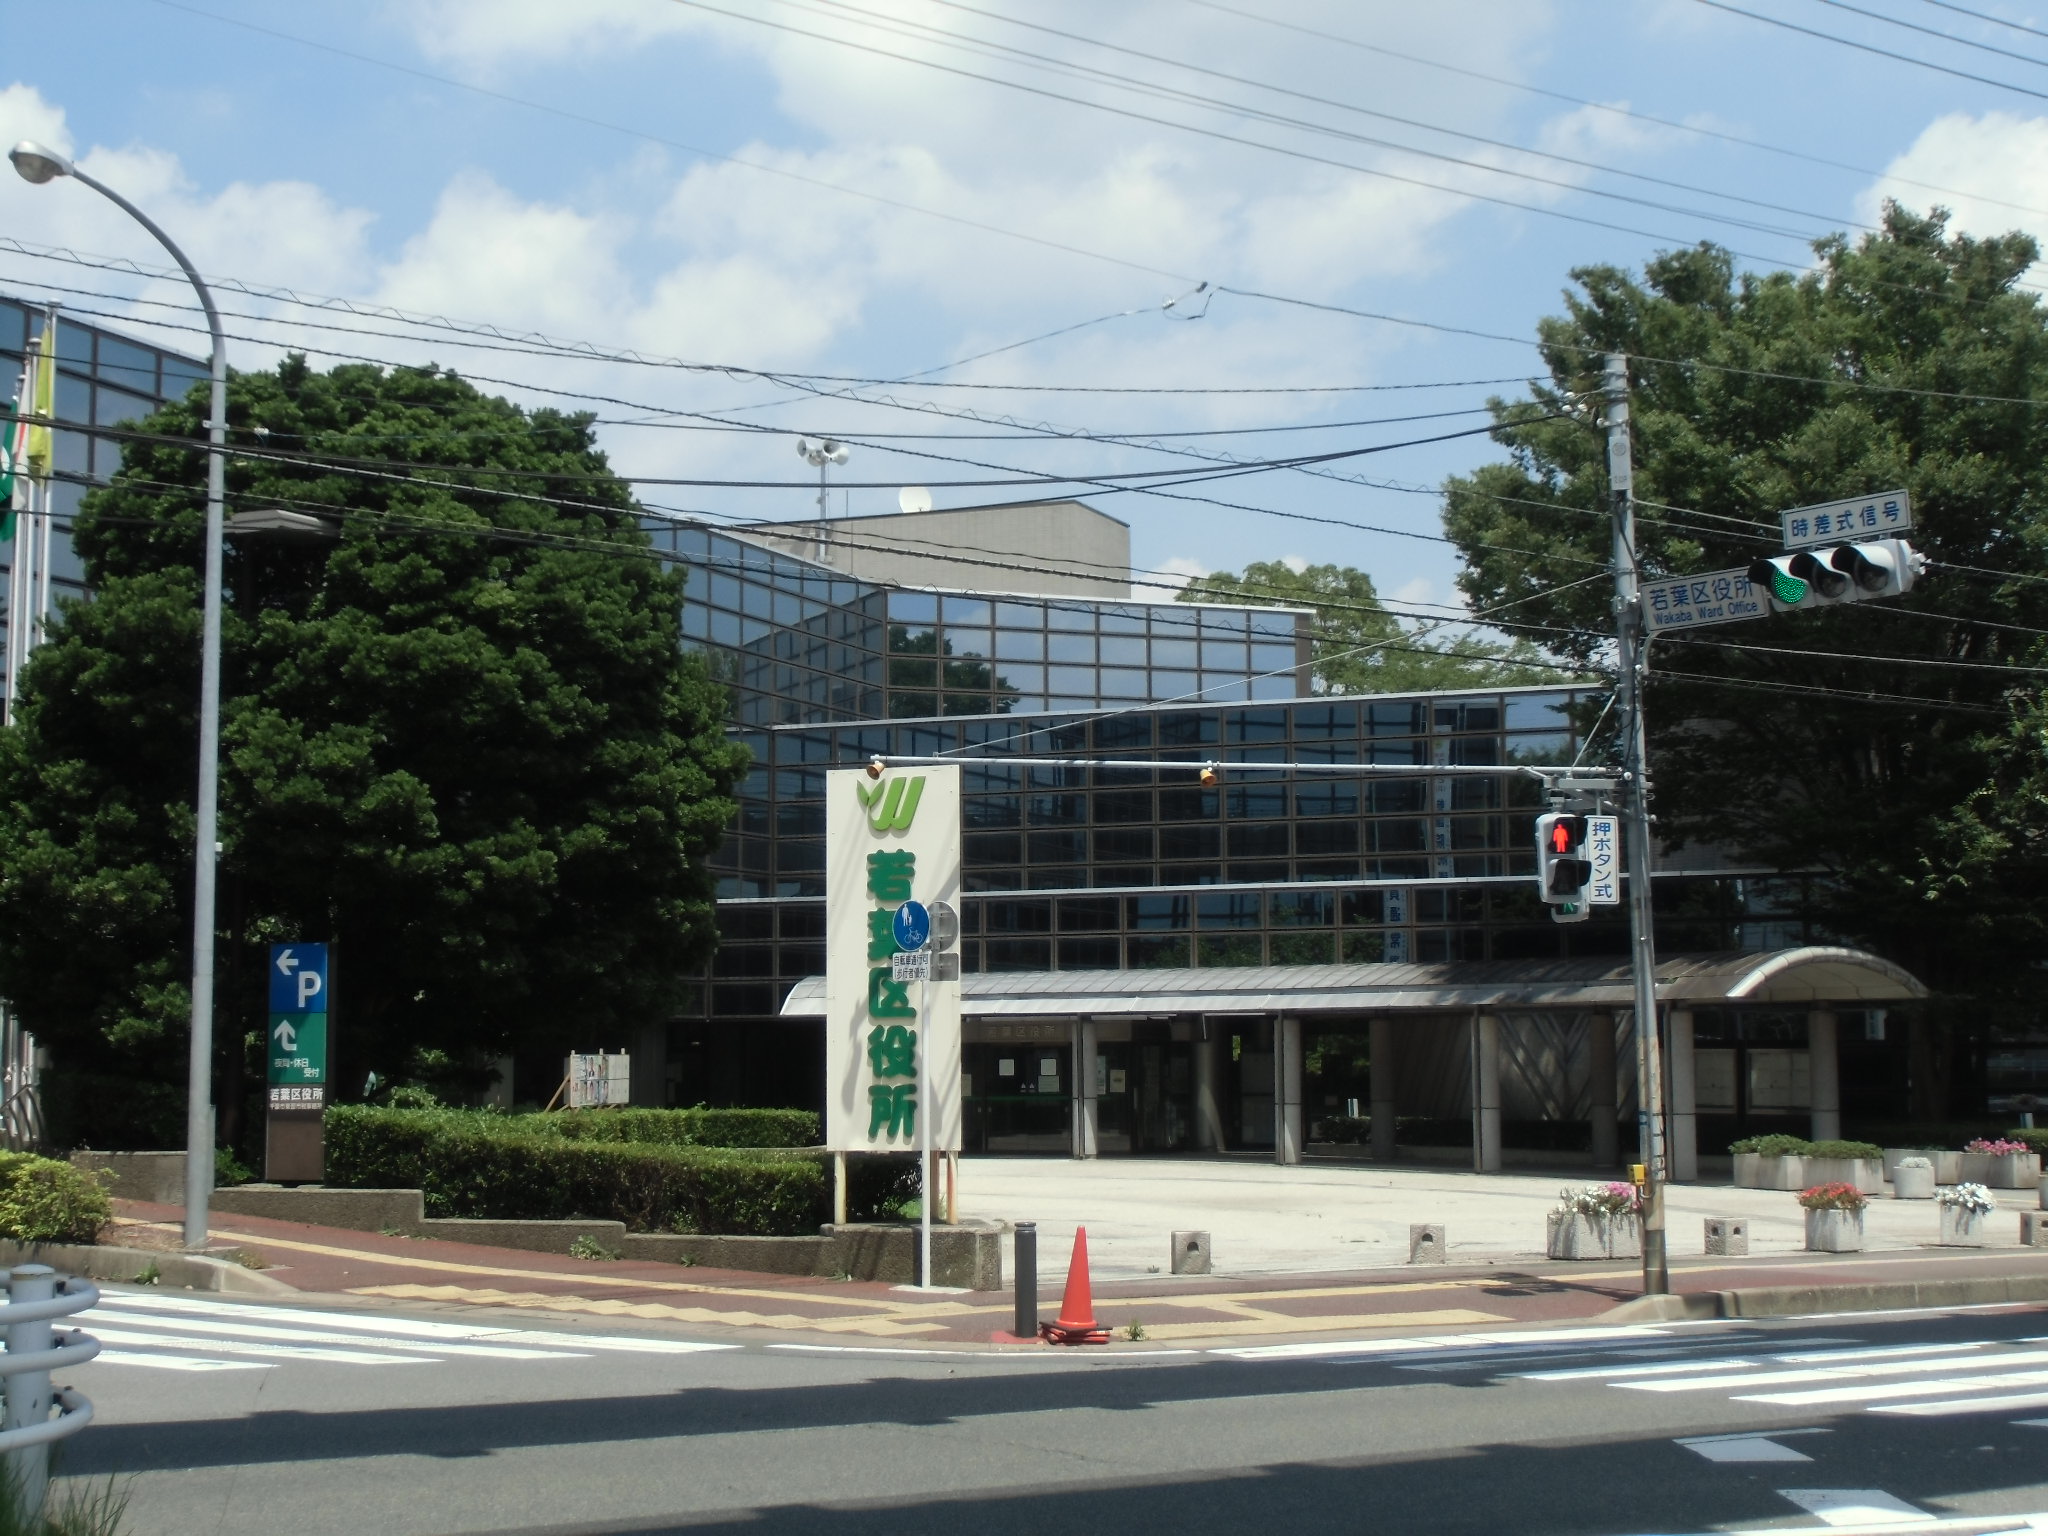 Government office. 656m to Chiba Wakaba Ward (government office)